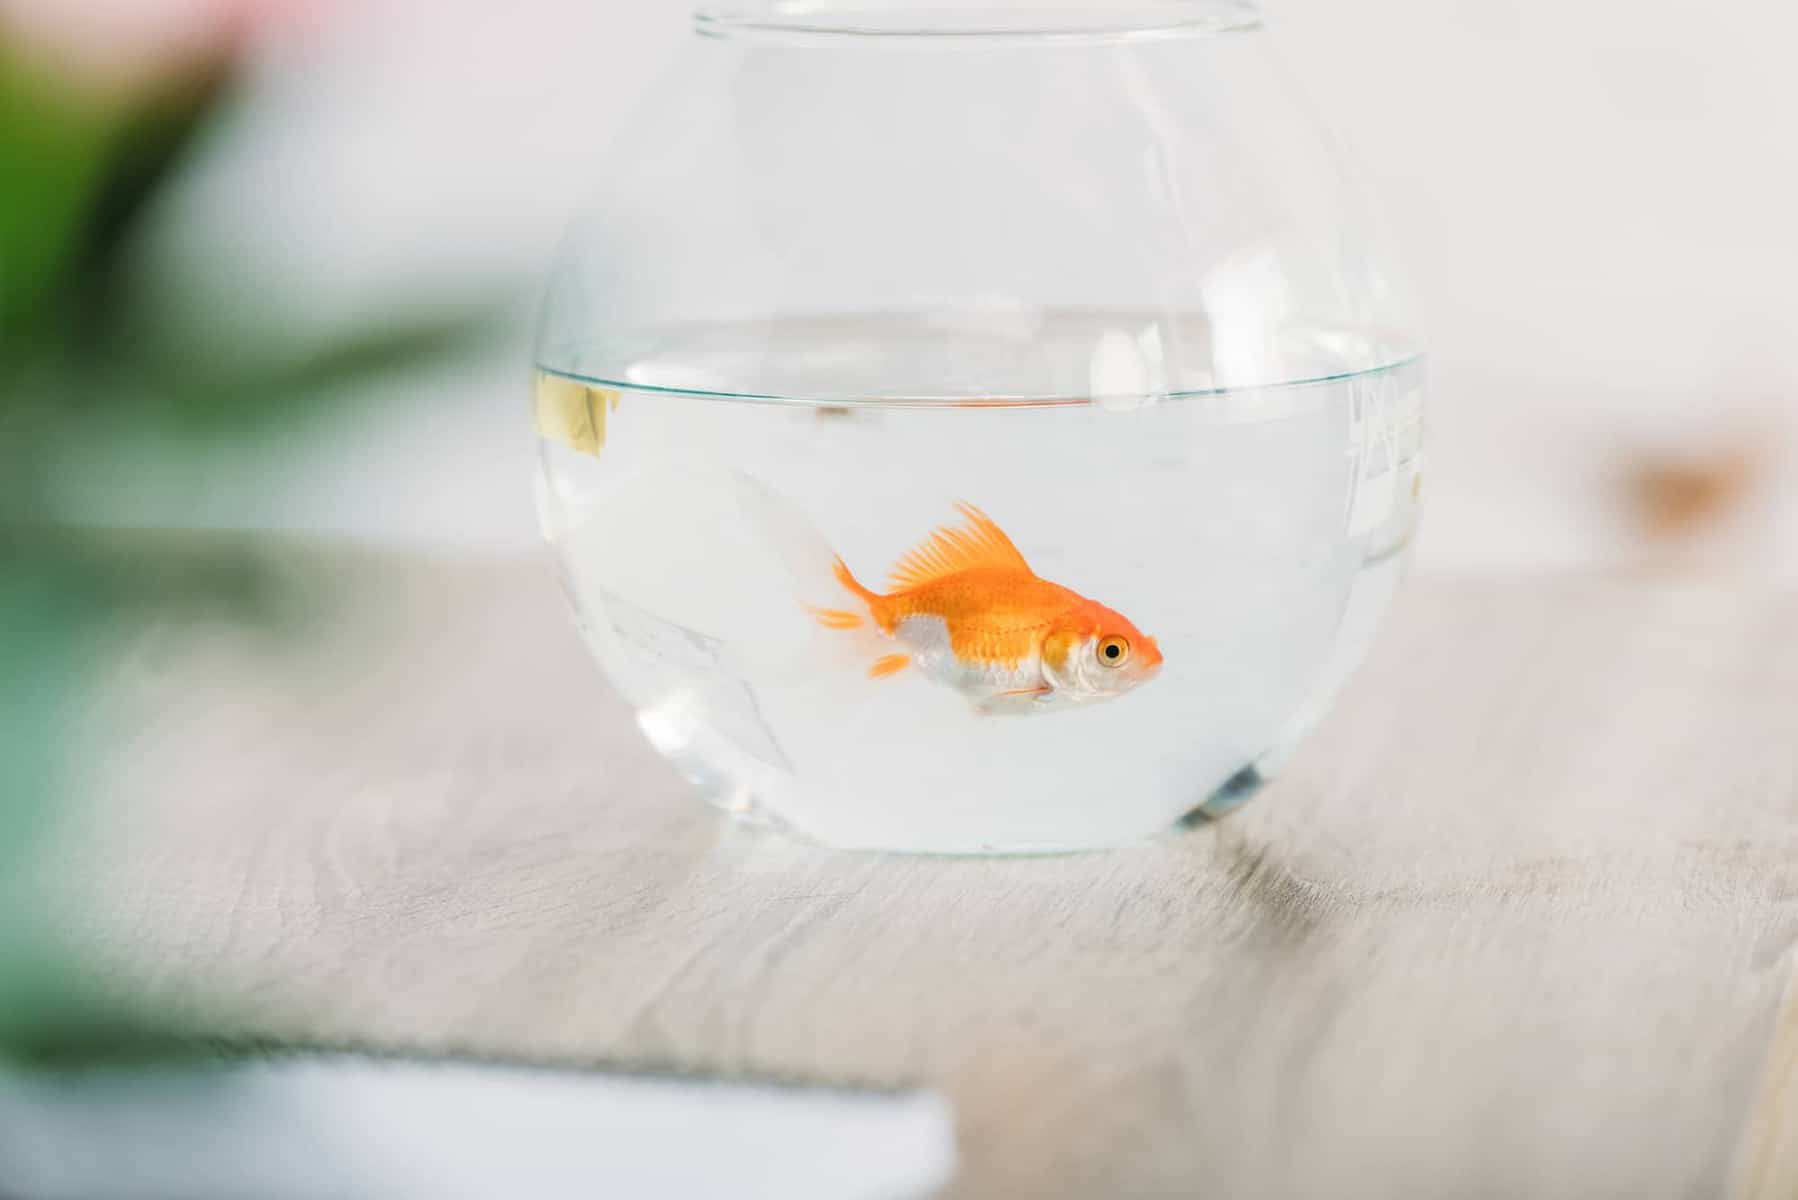 Why Goldfish Bowls Should Be Banned